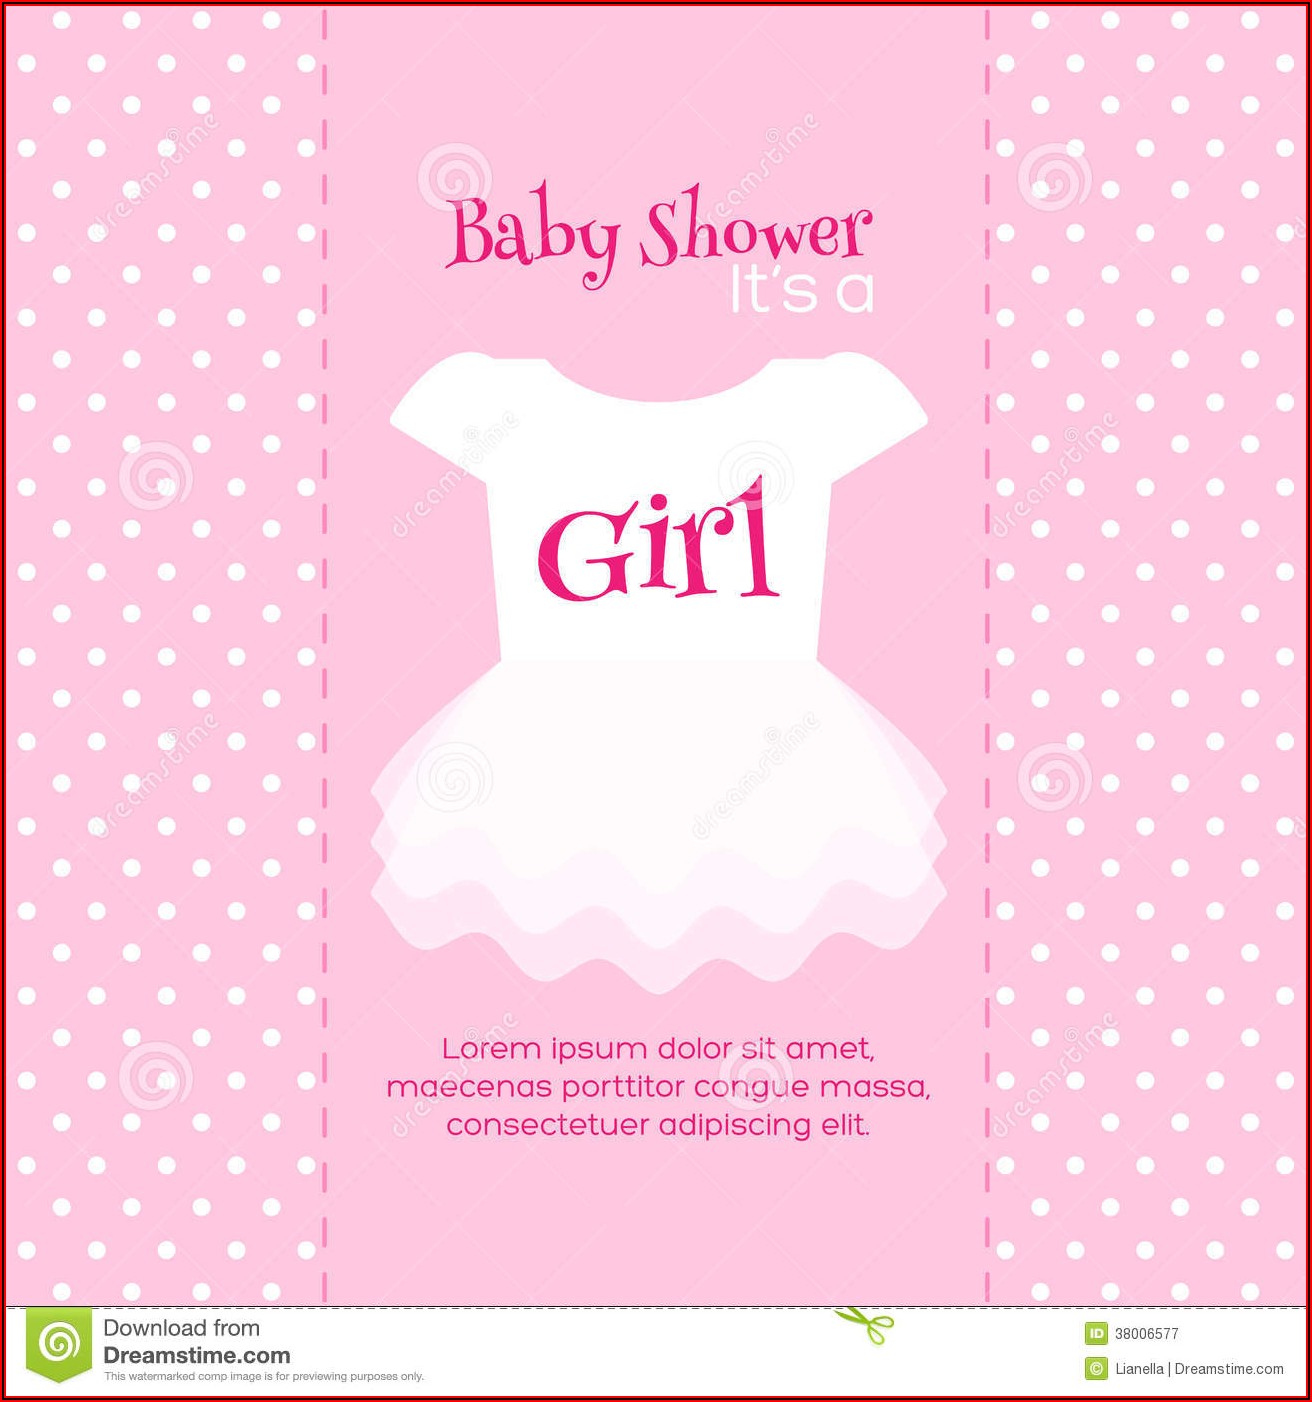 Free Printable Baby Shower Invitation Templates For A Girl